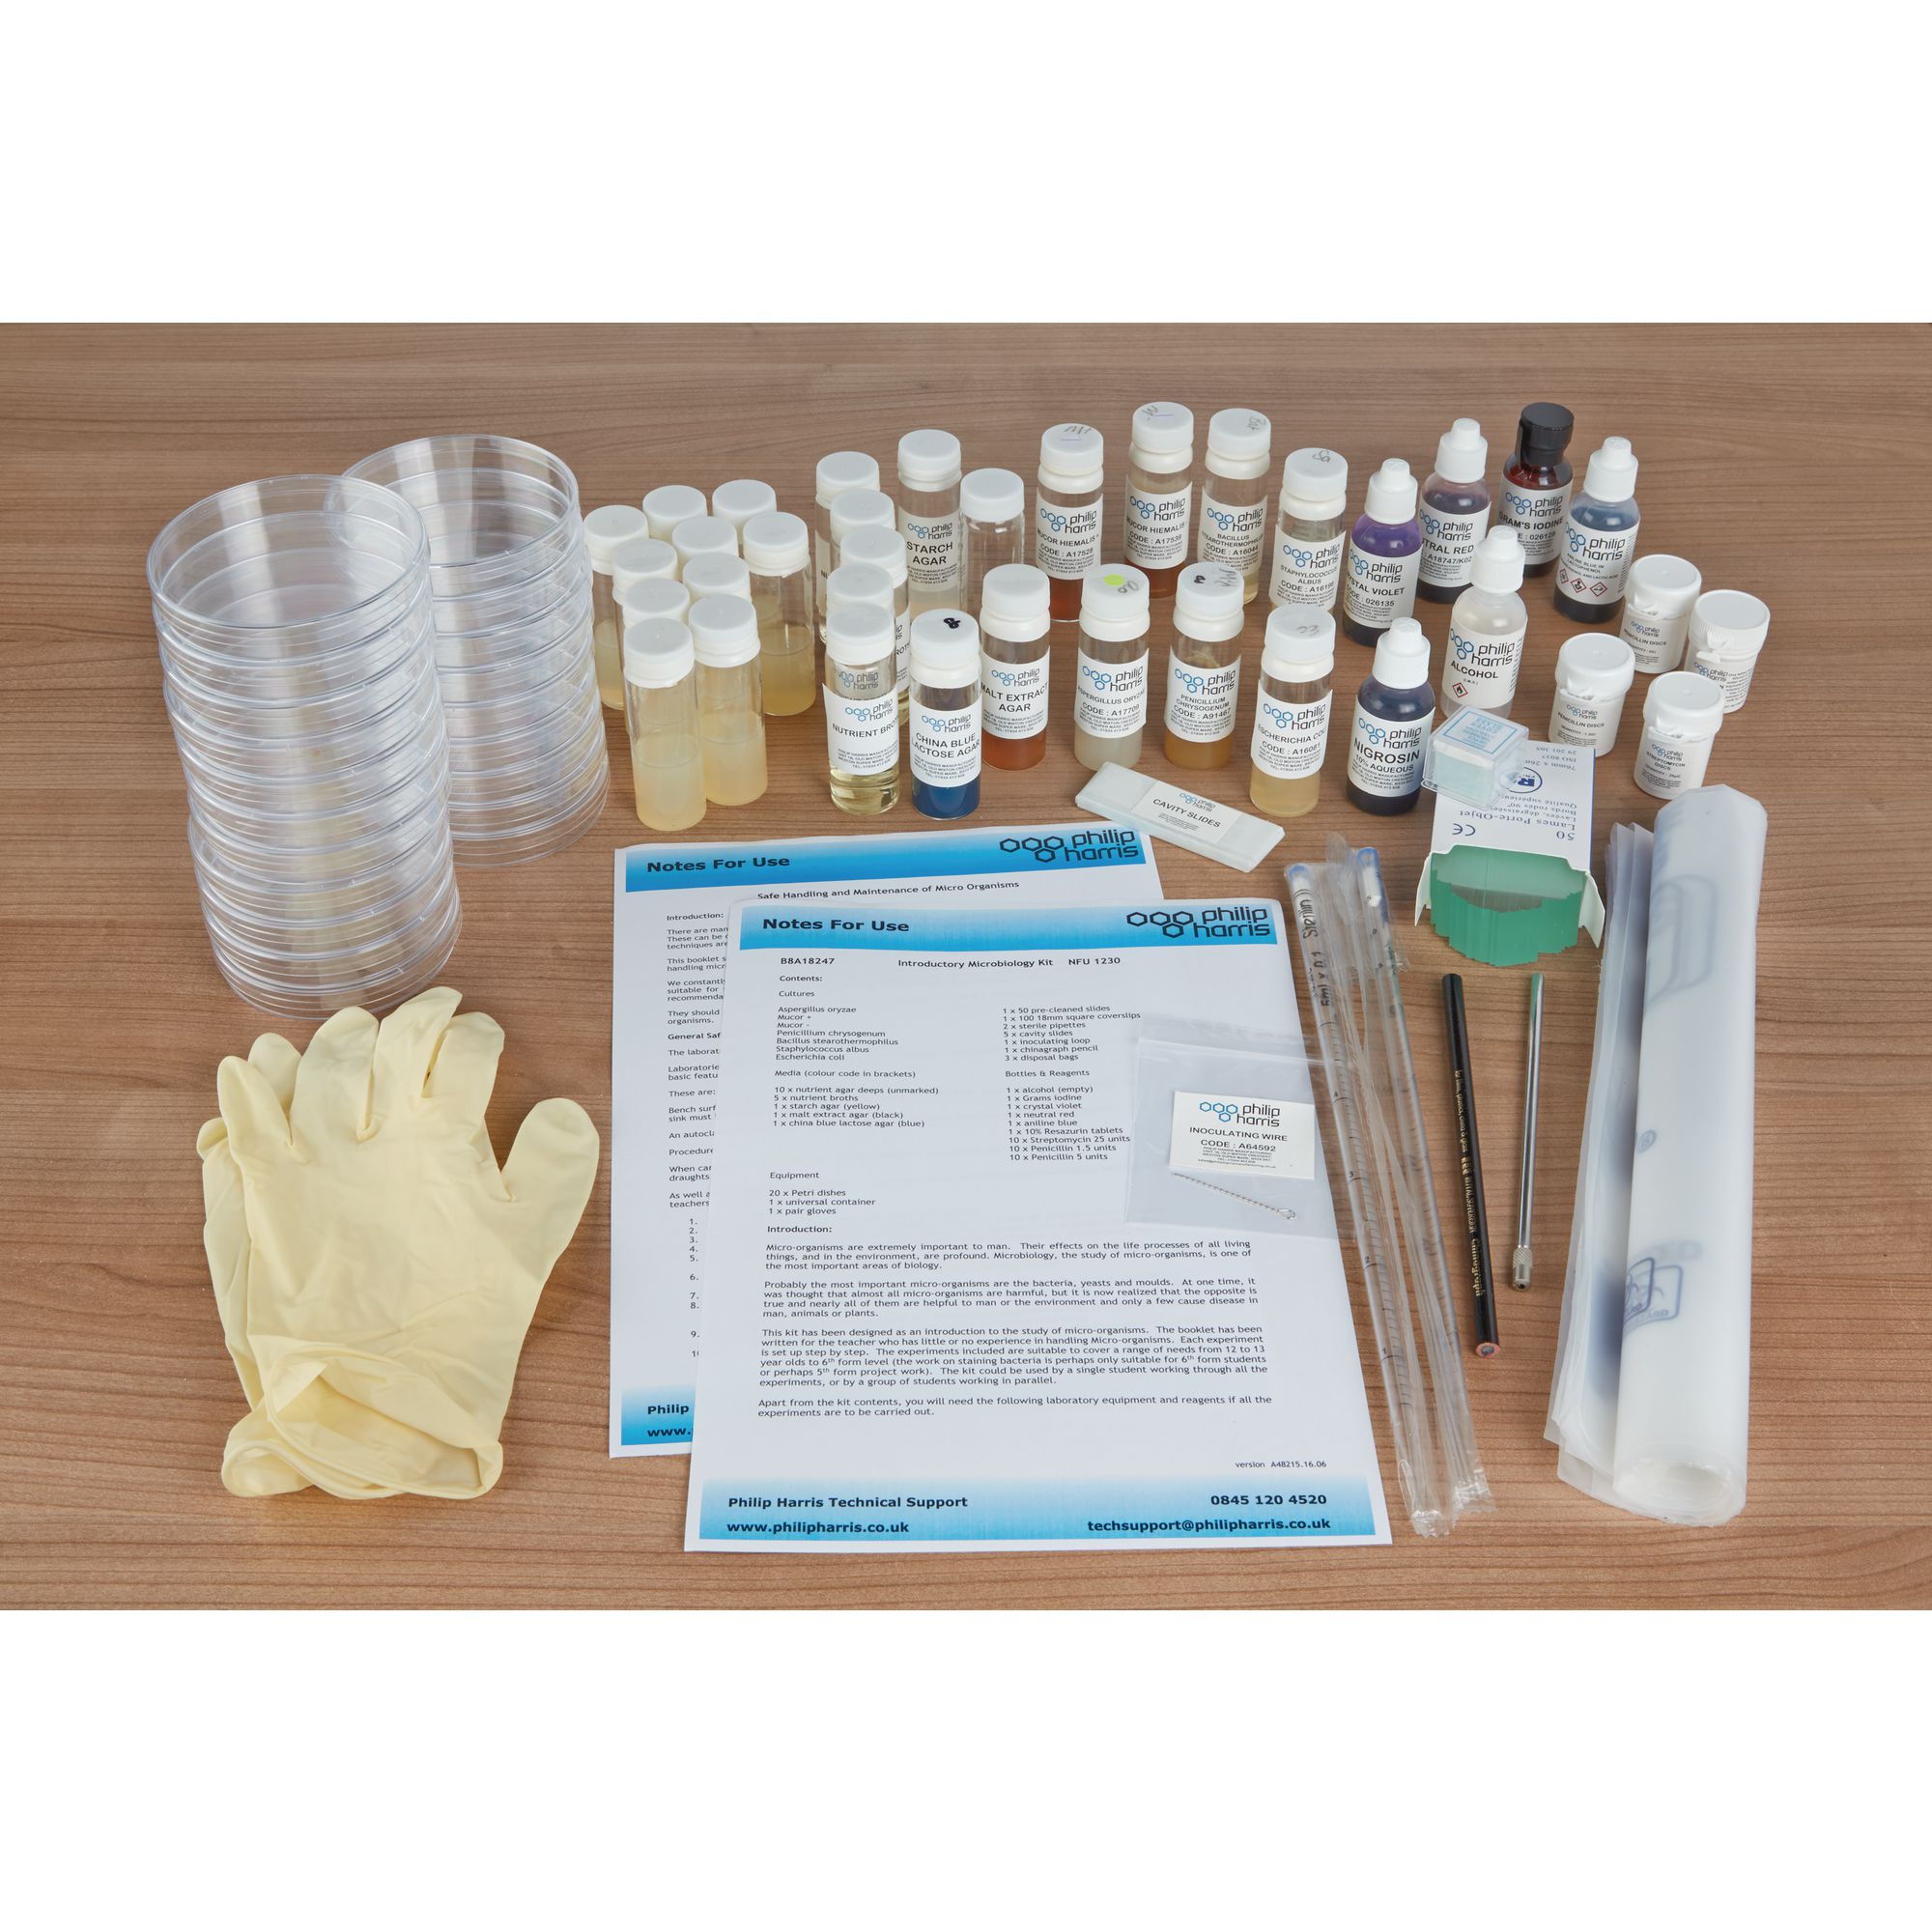 Introductory Microbiology Kit.